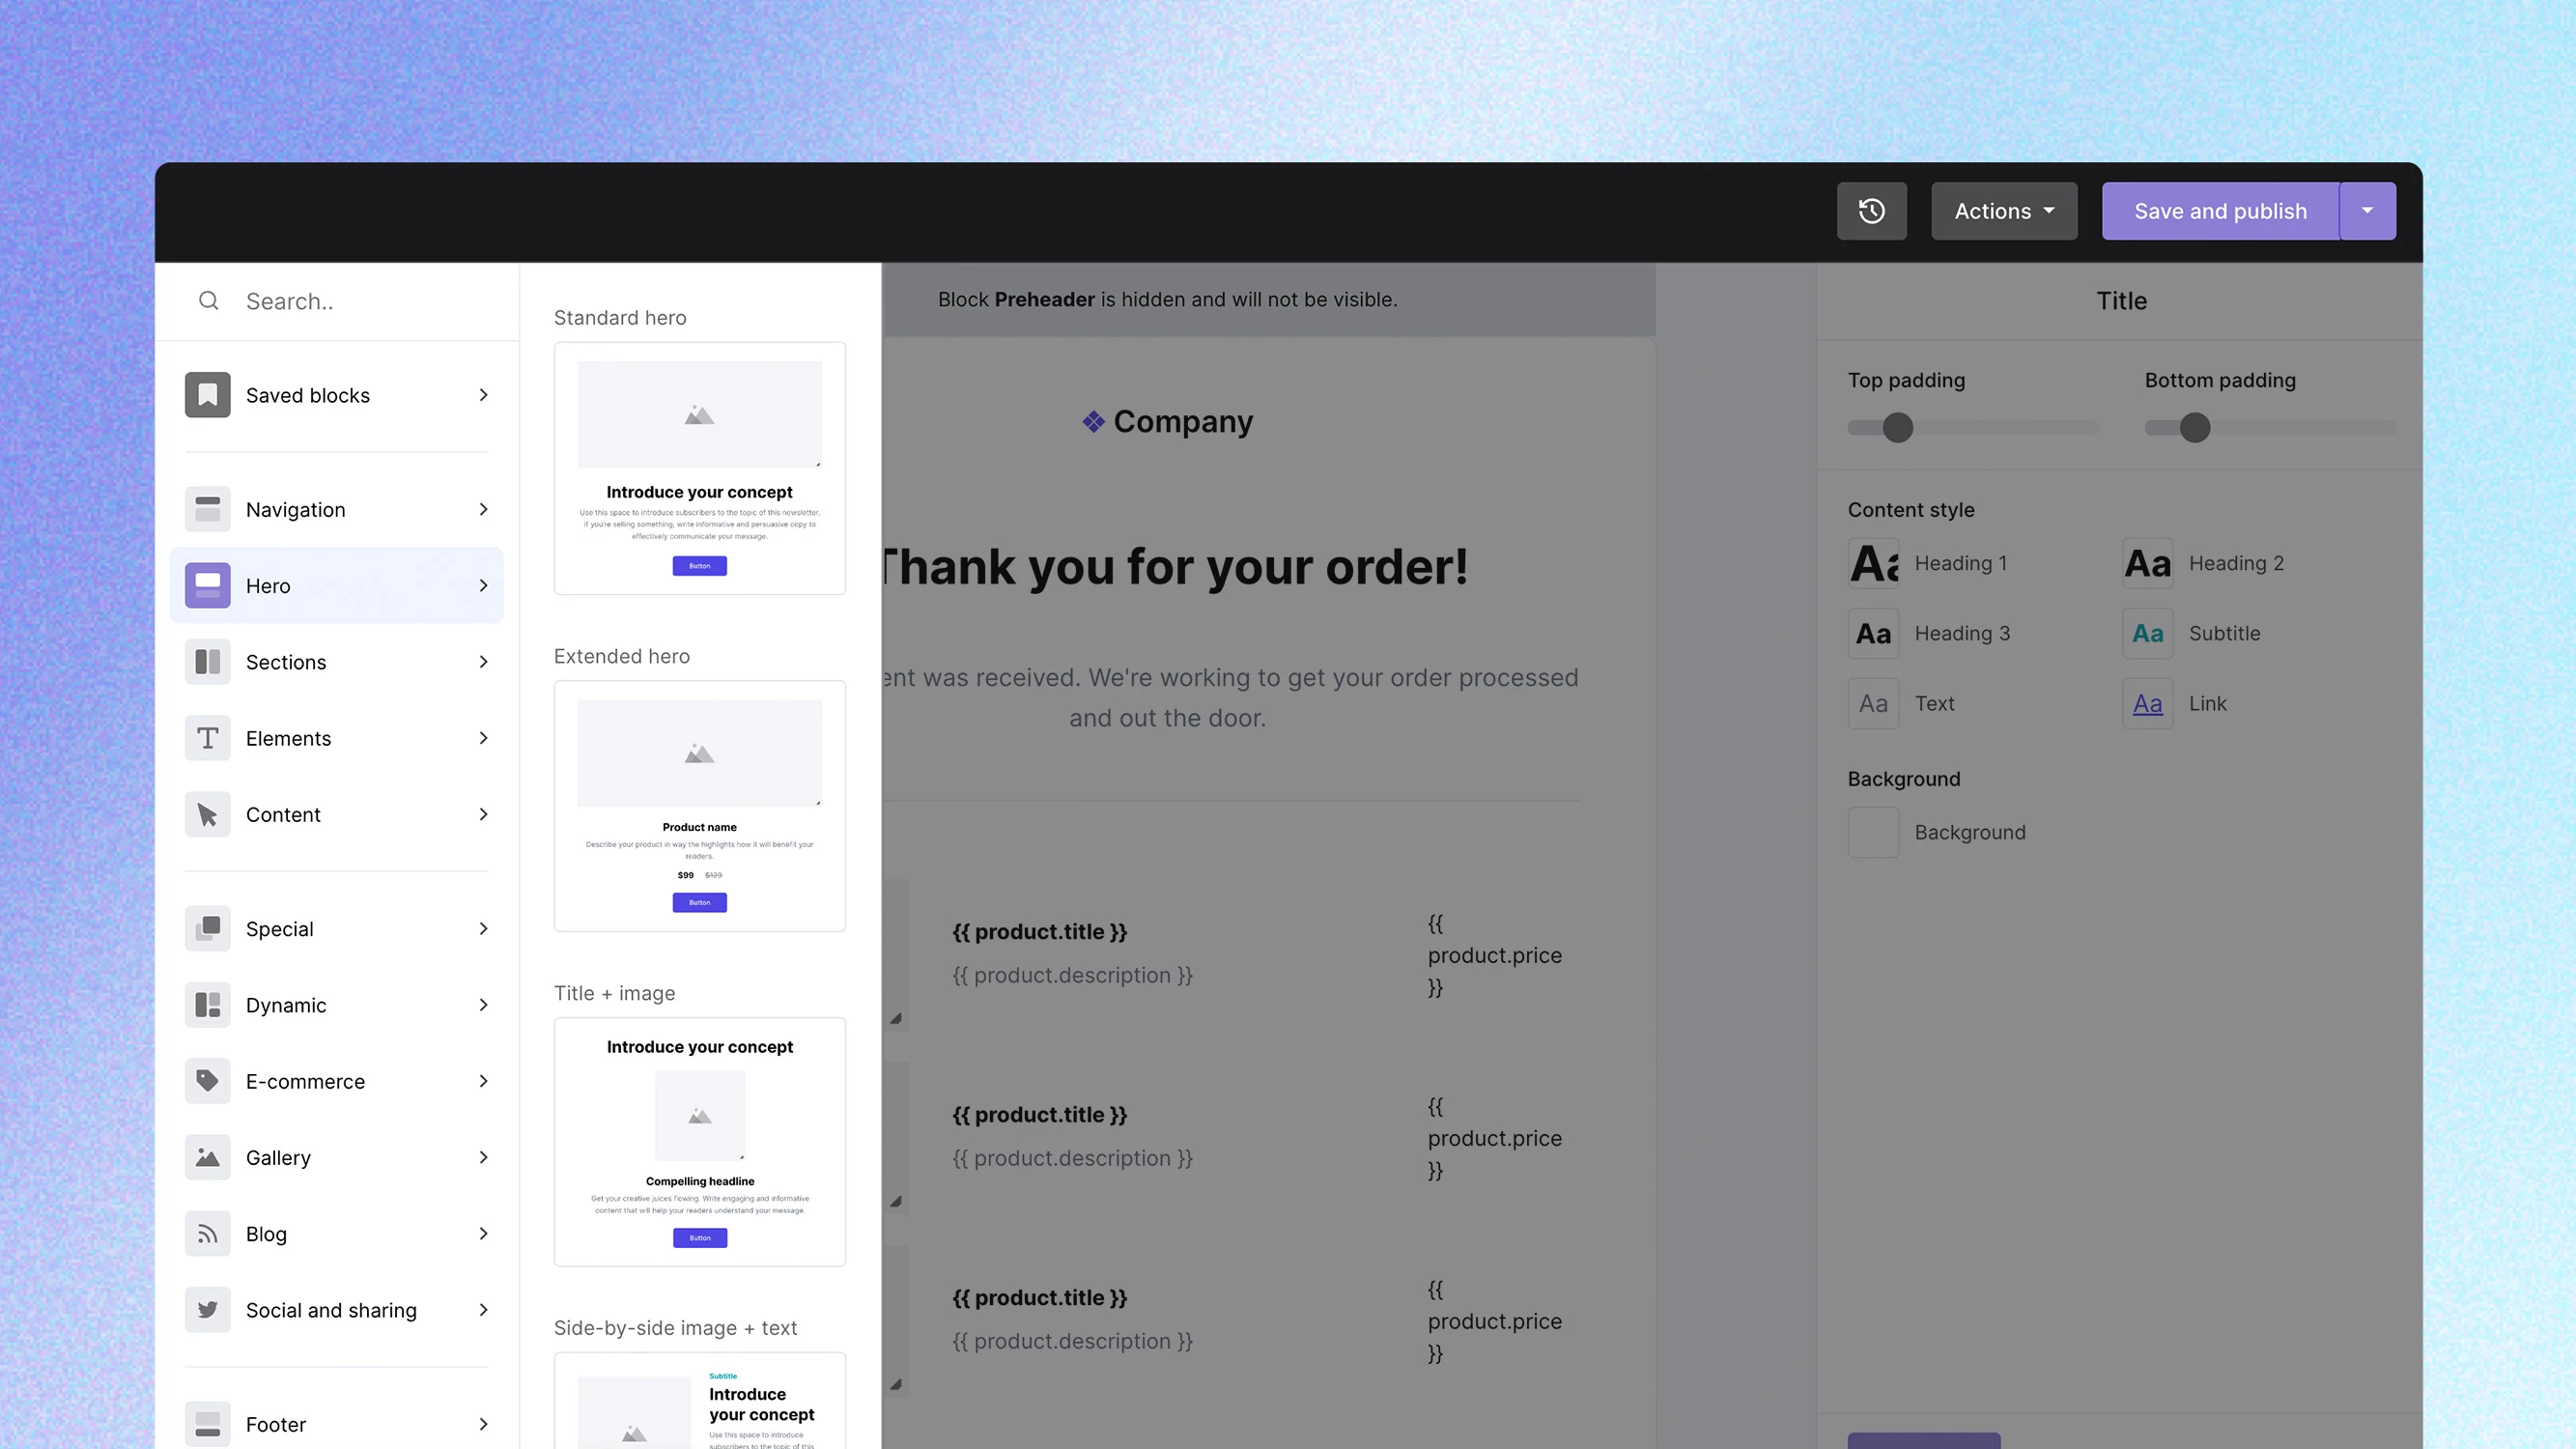 A screenshot of the MailerSend Drag & drop email builder showing the new interface.